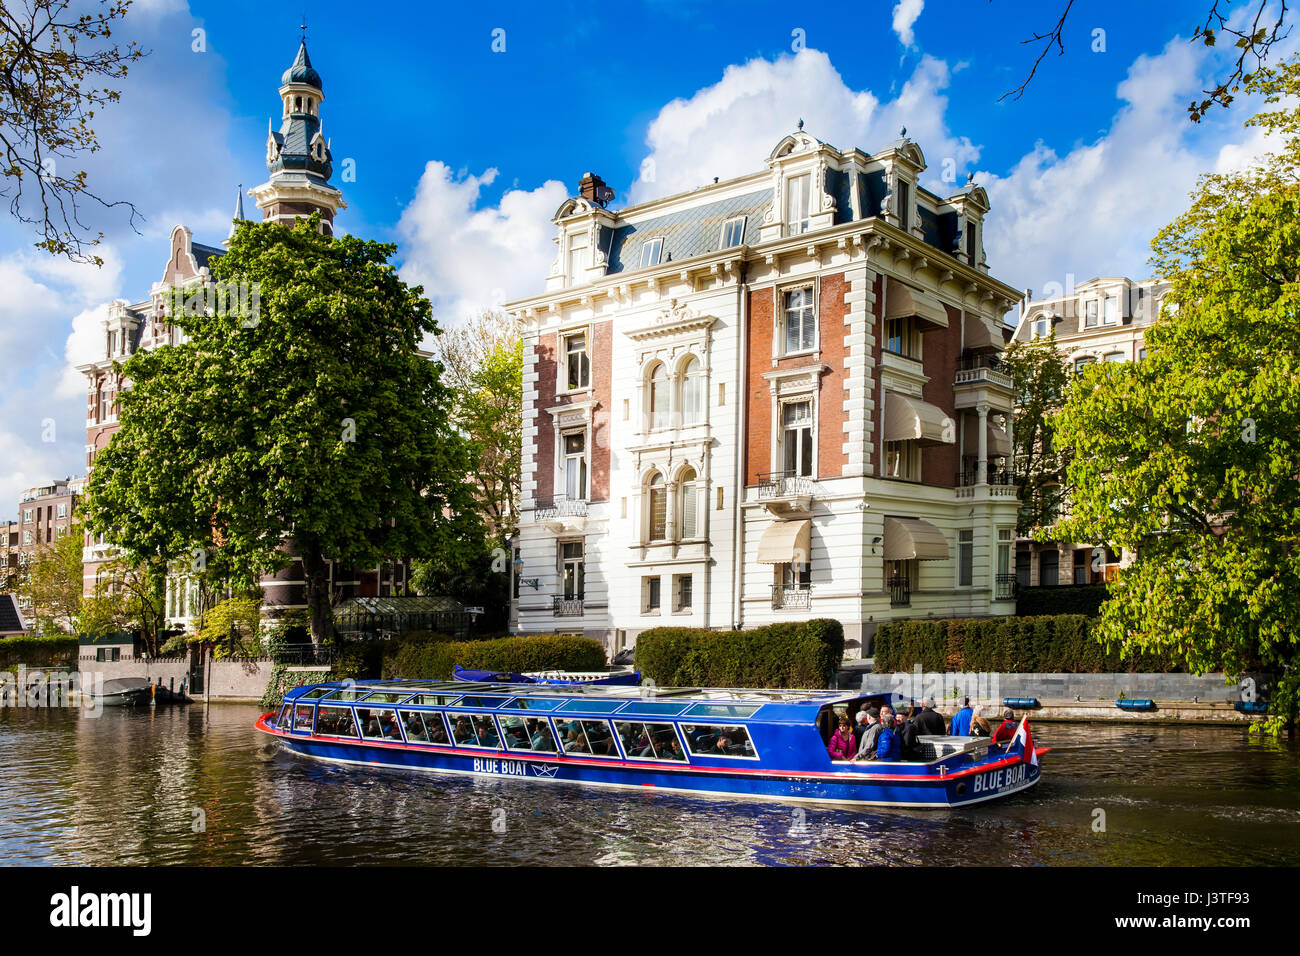 Blue boat company canal trip in Amsterdam city, Netherlands Stock Photo